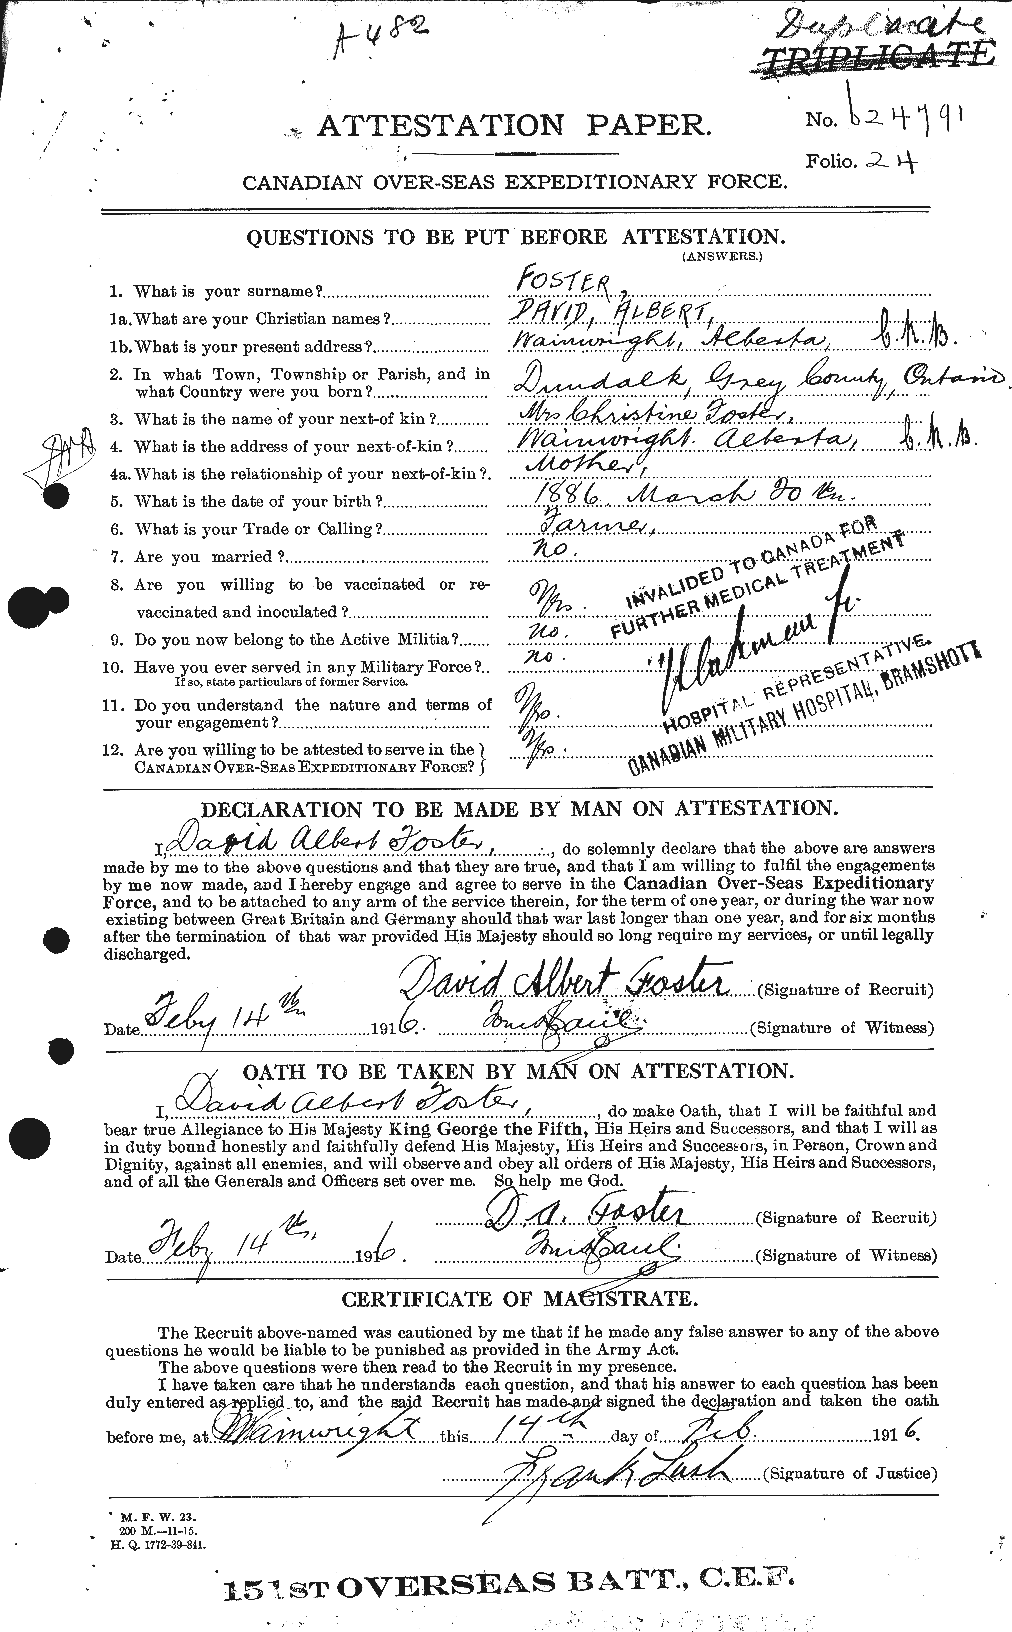 Personnel Records of the First World War - CEF 330557a